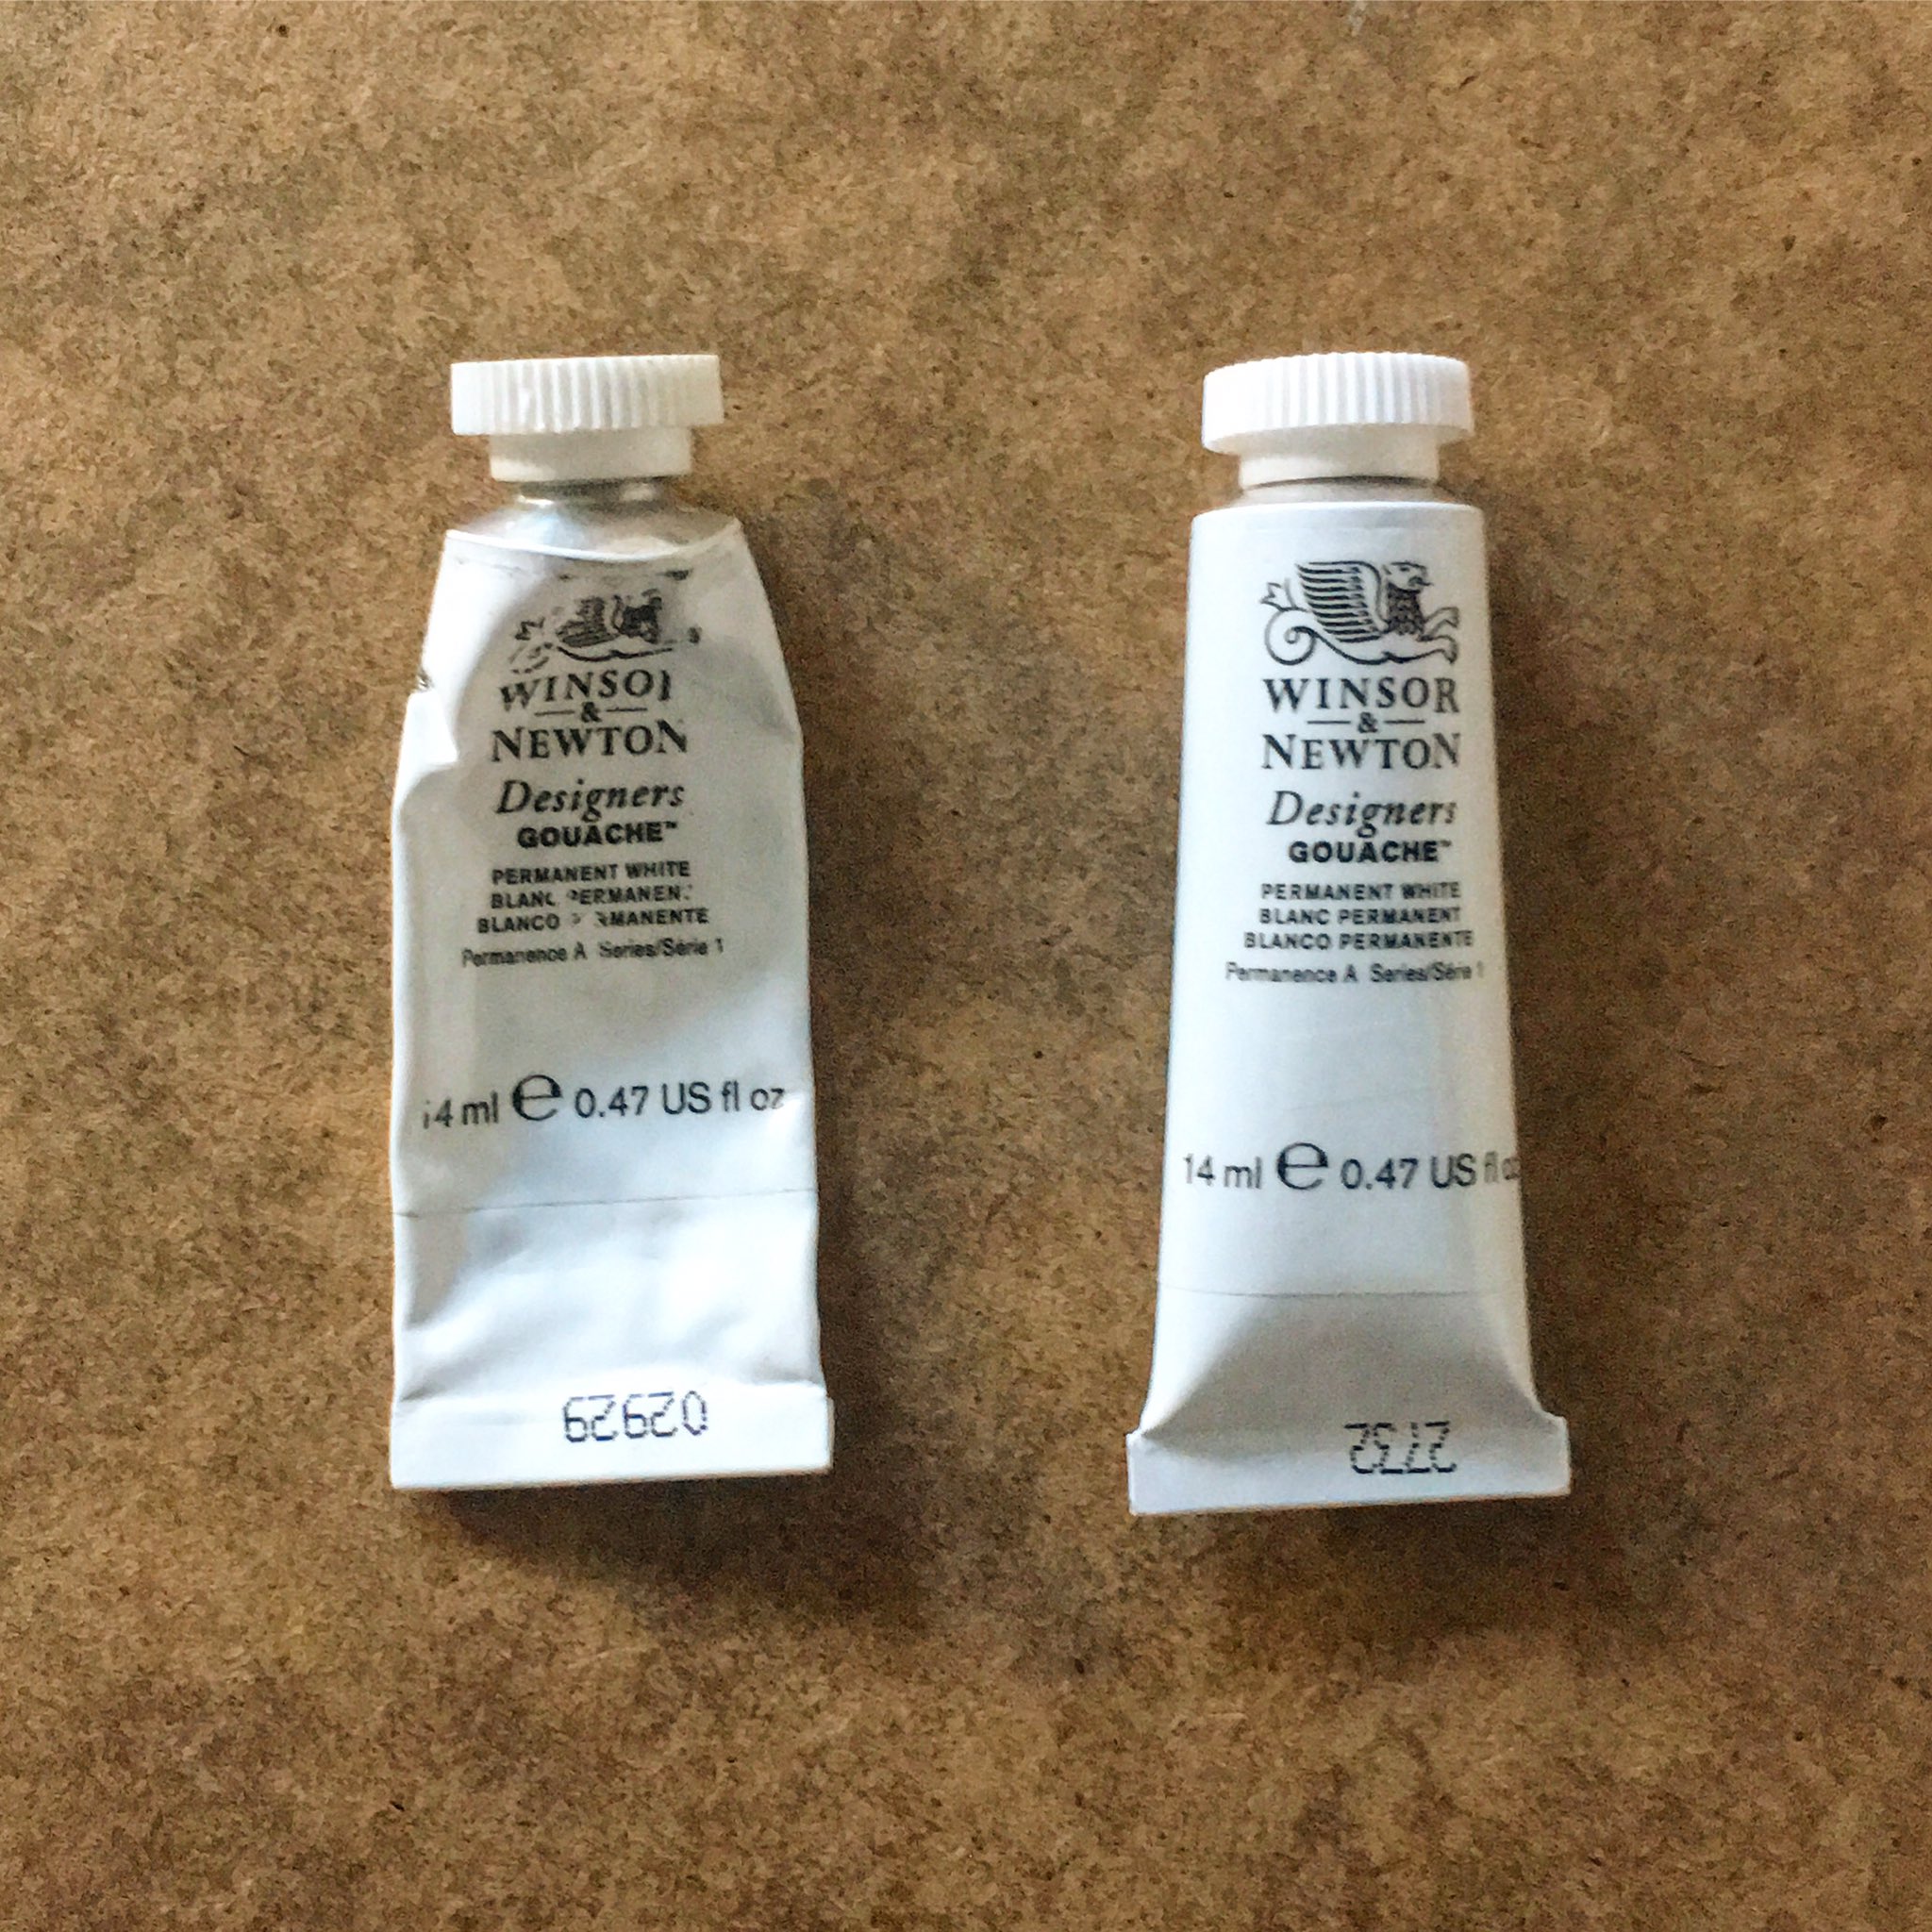 Mark Crilley on X: R. I.P. my beloved white gouache. 😢 Long live